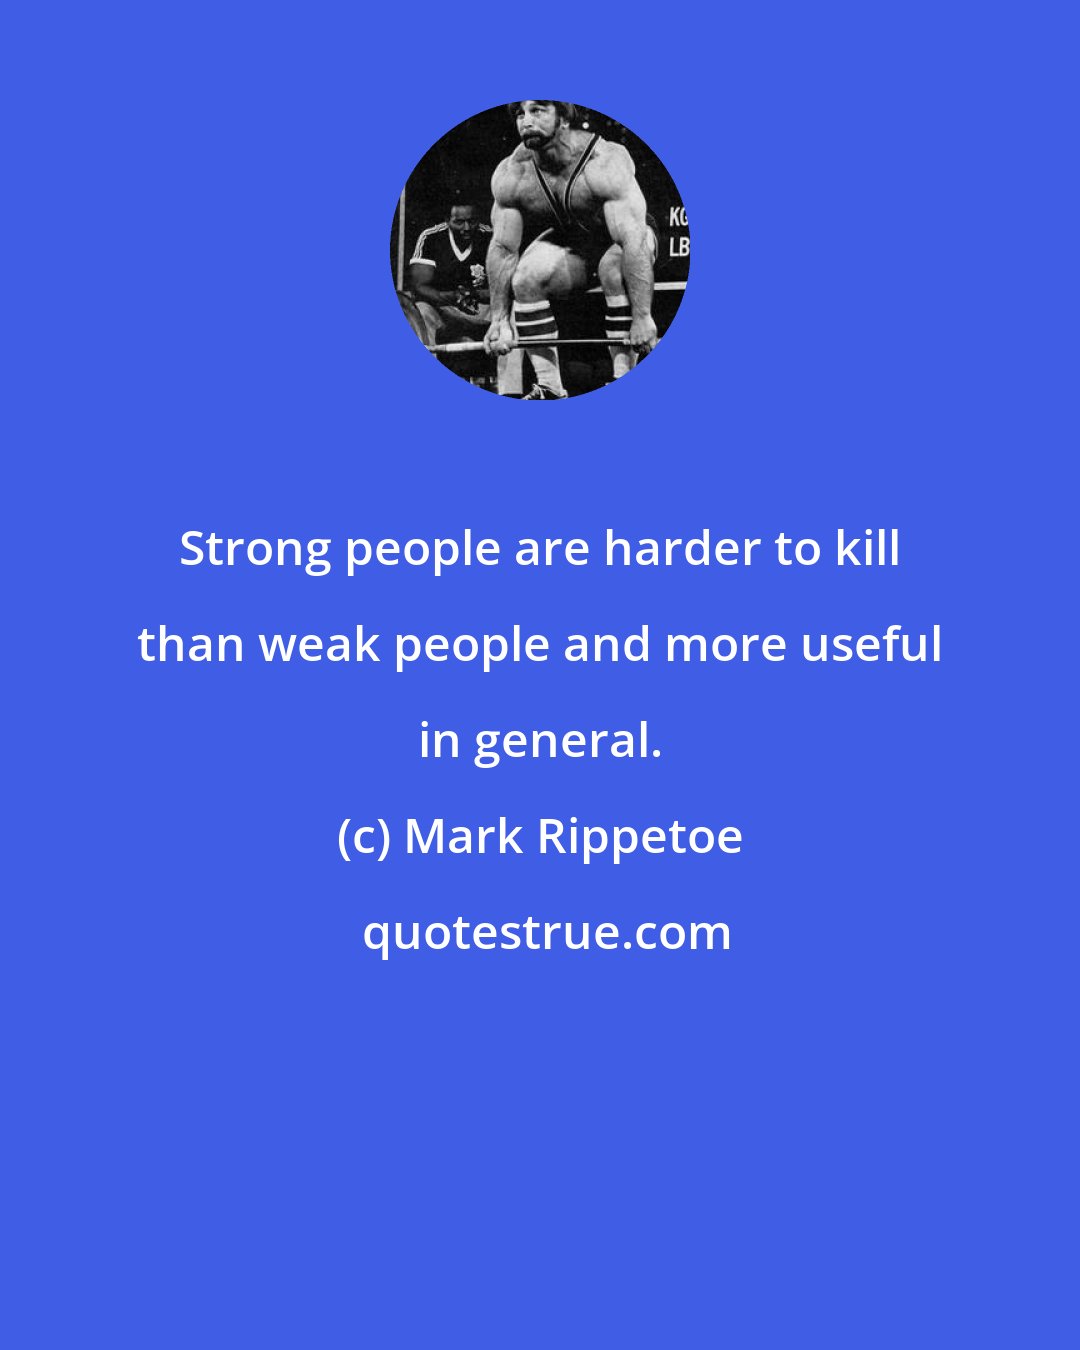 Mark Rippetoe: Strong people are harder to kill than weak people and more useful in general.